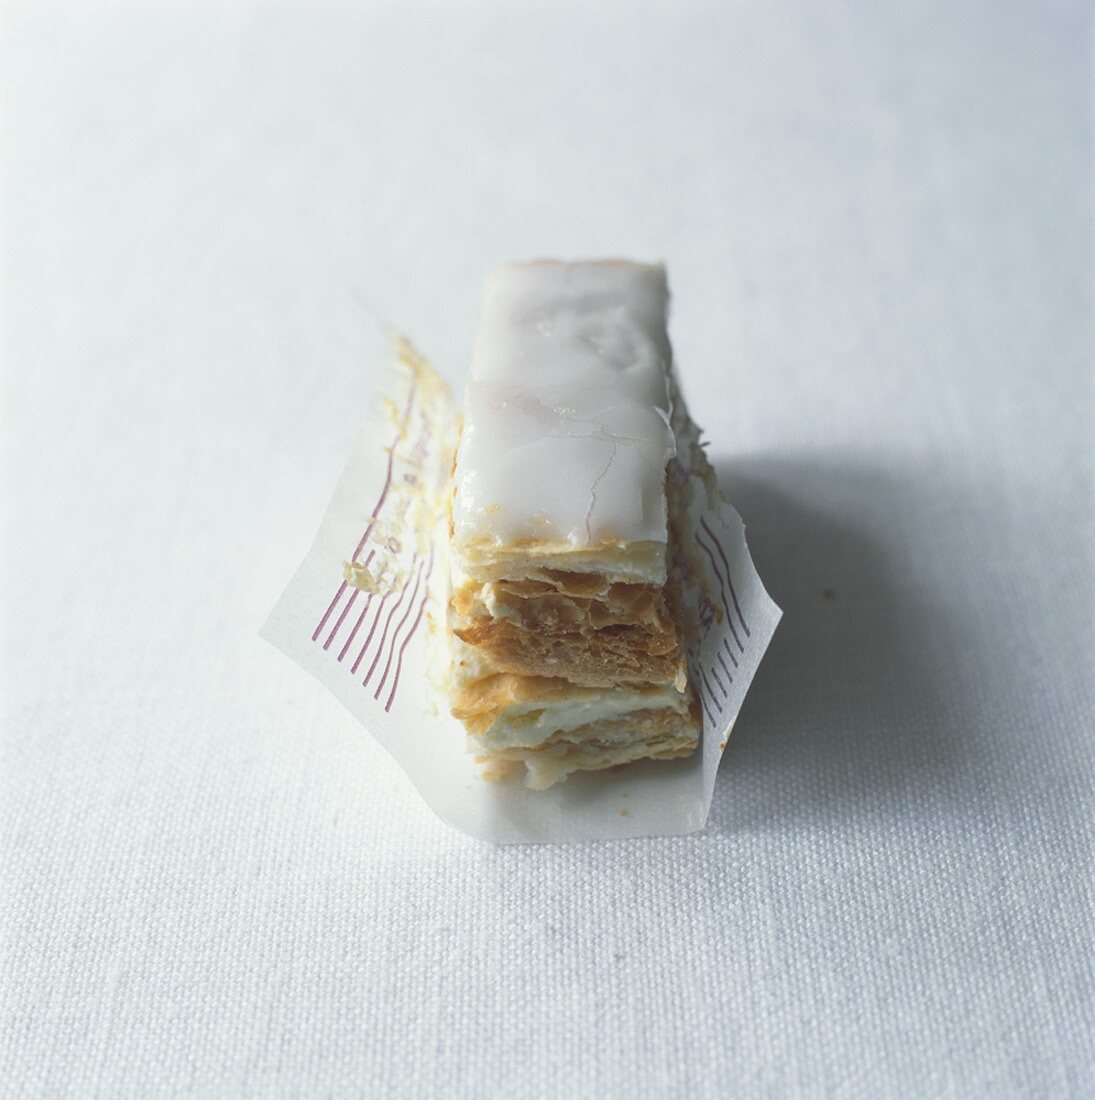 Iced, filled puff pastry slices in paper